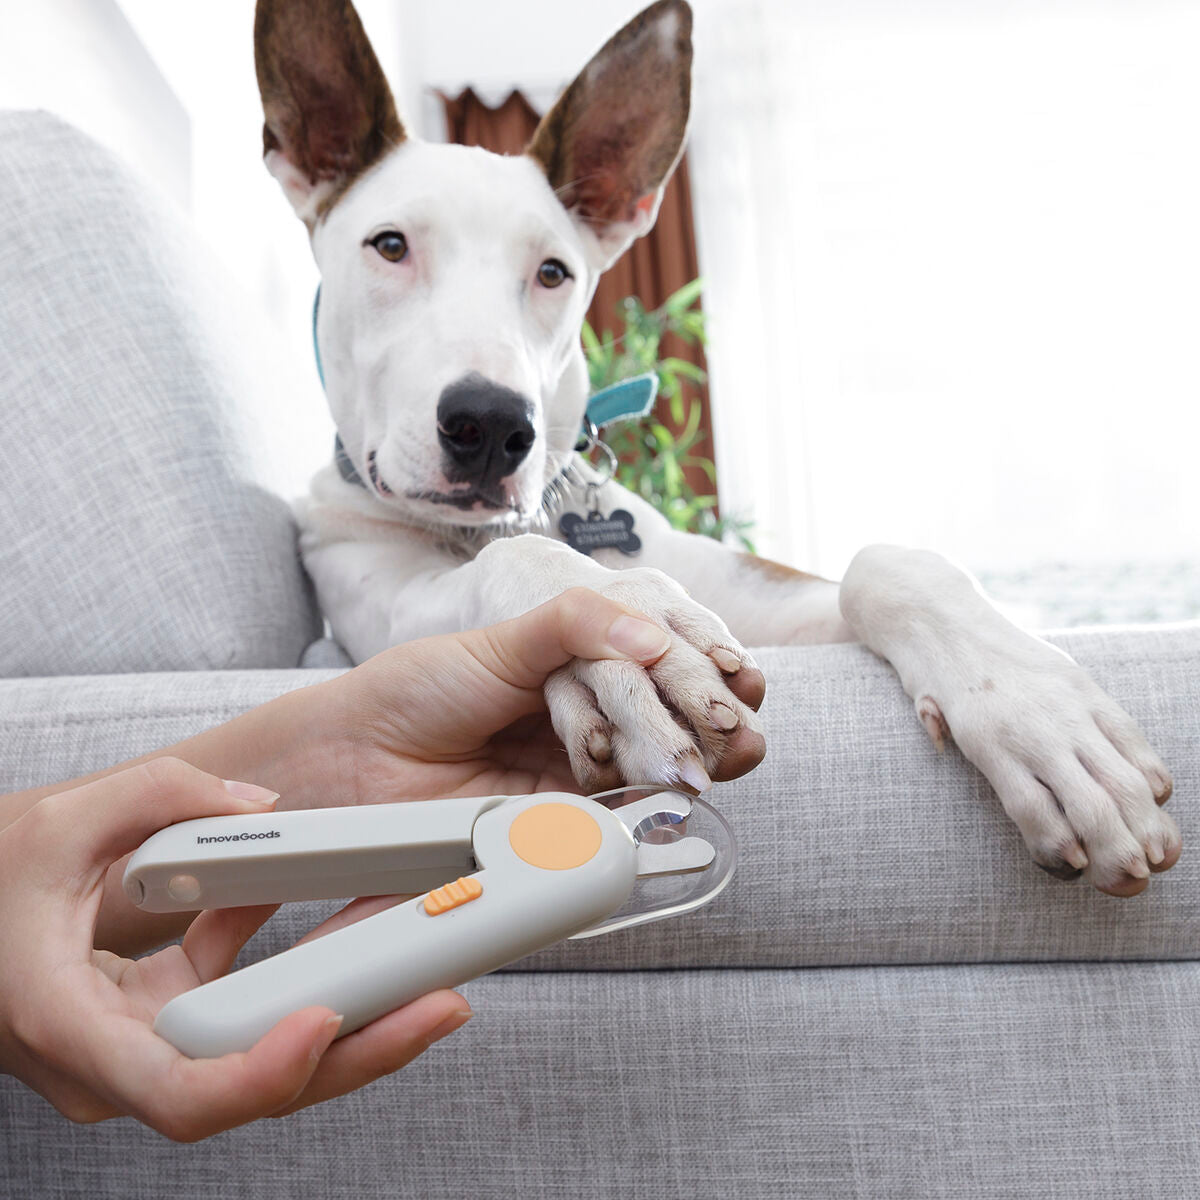 Pet Nail Clippers z LED Clipet Innovagoods